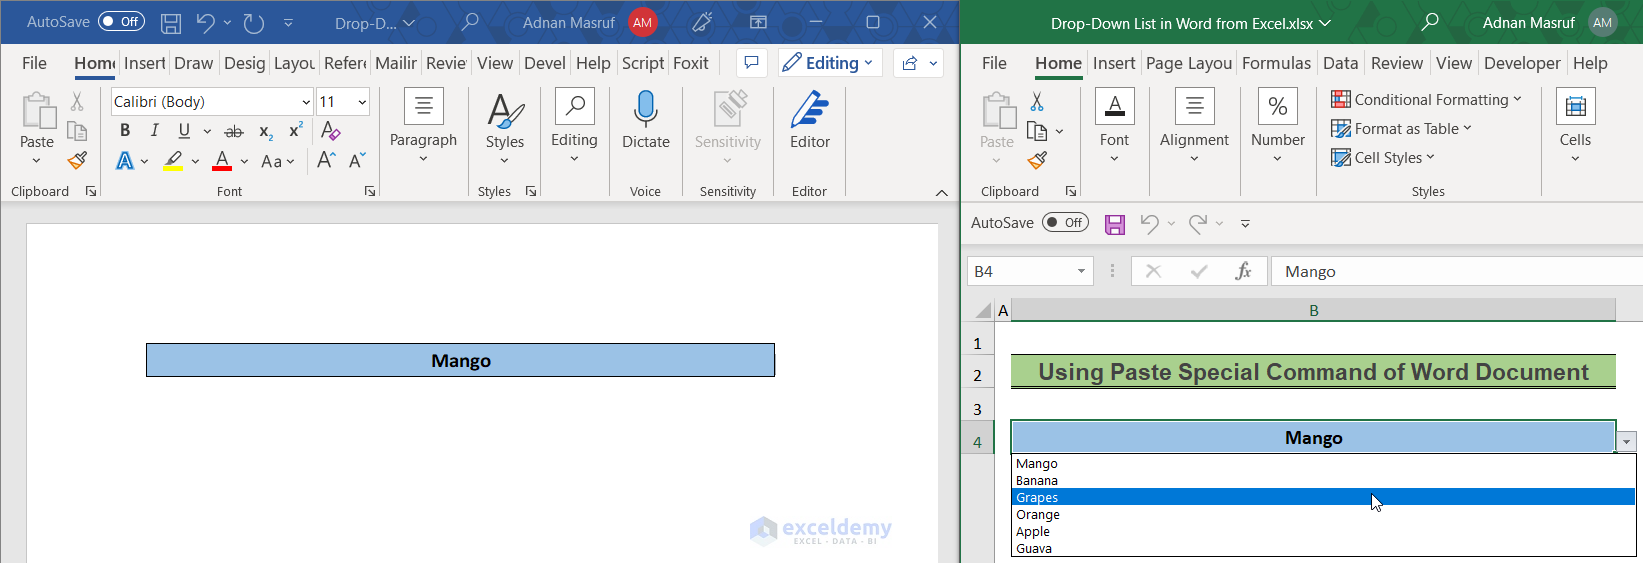 using paste special command of word document to add drop-down list in word from excel